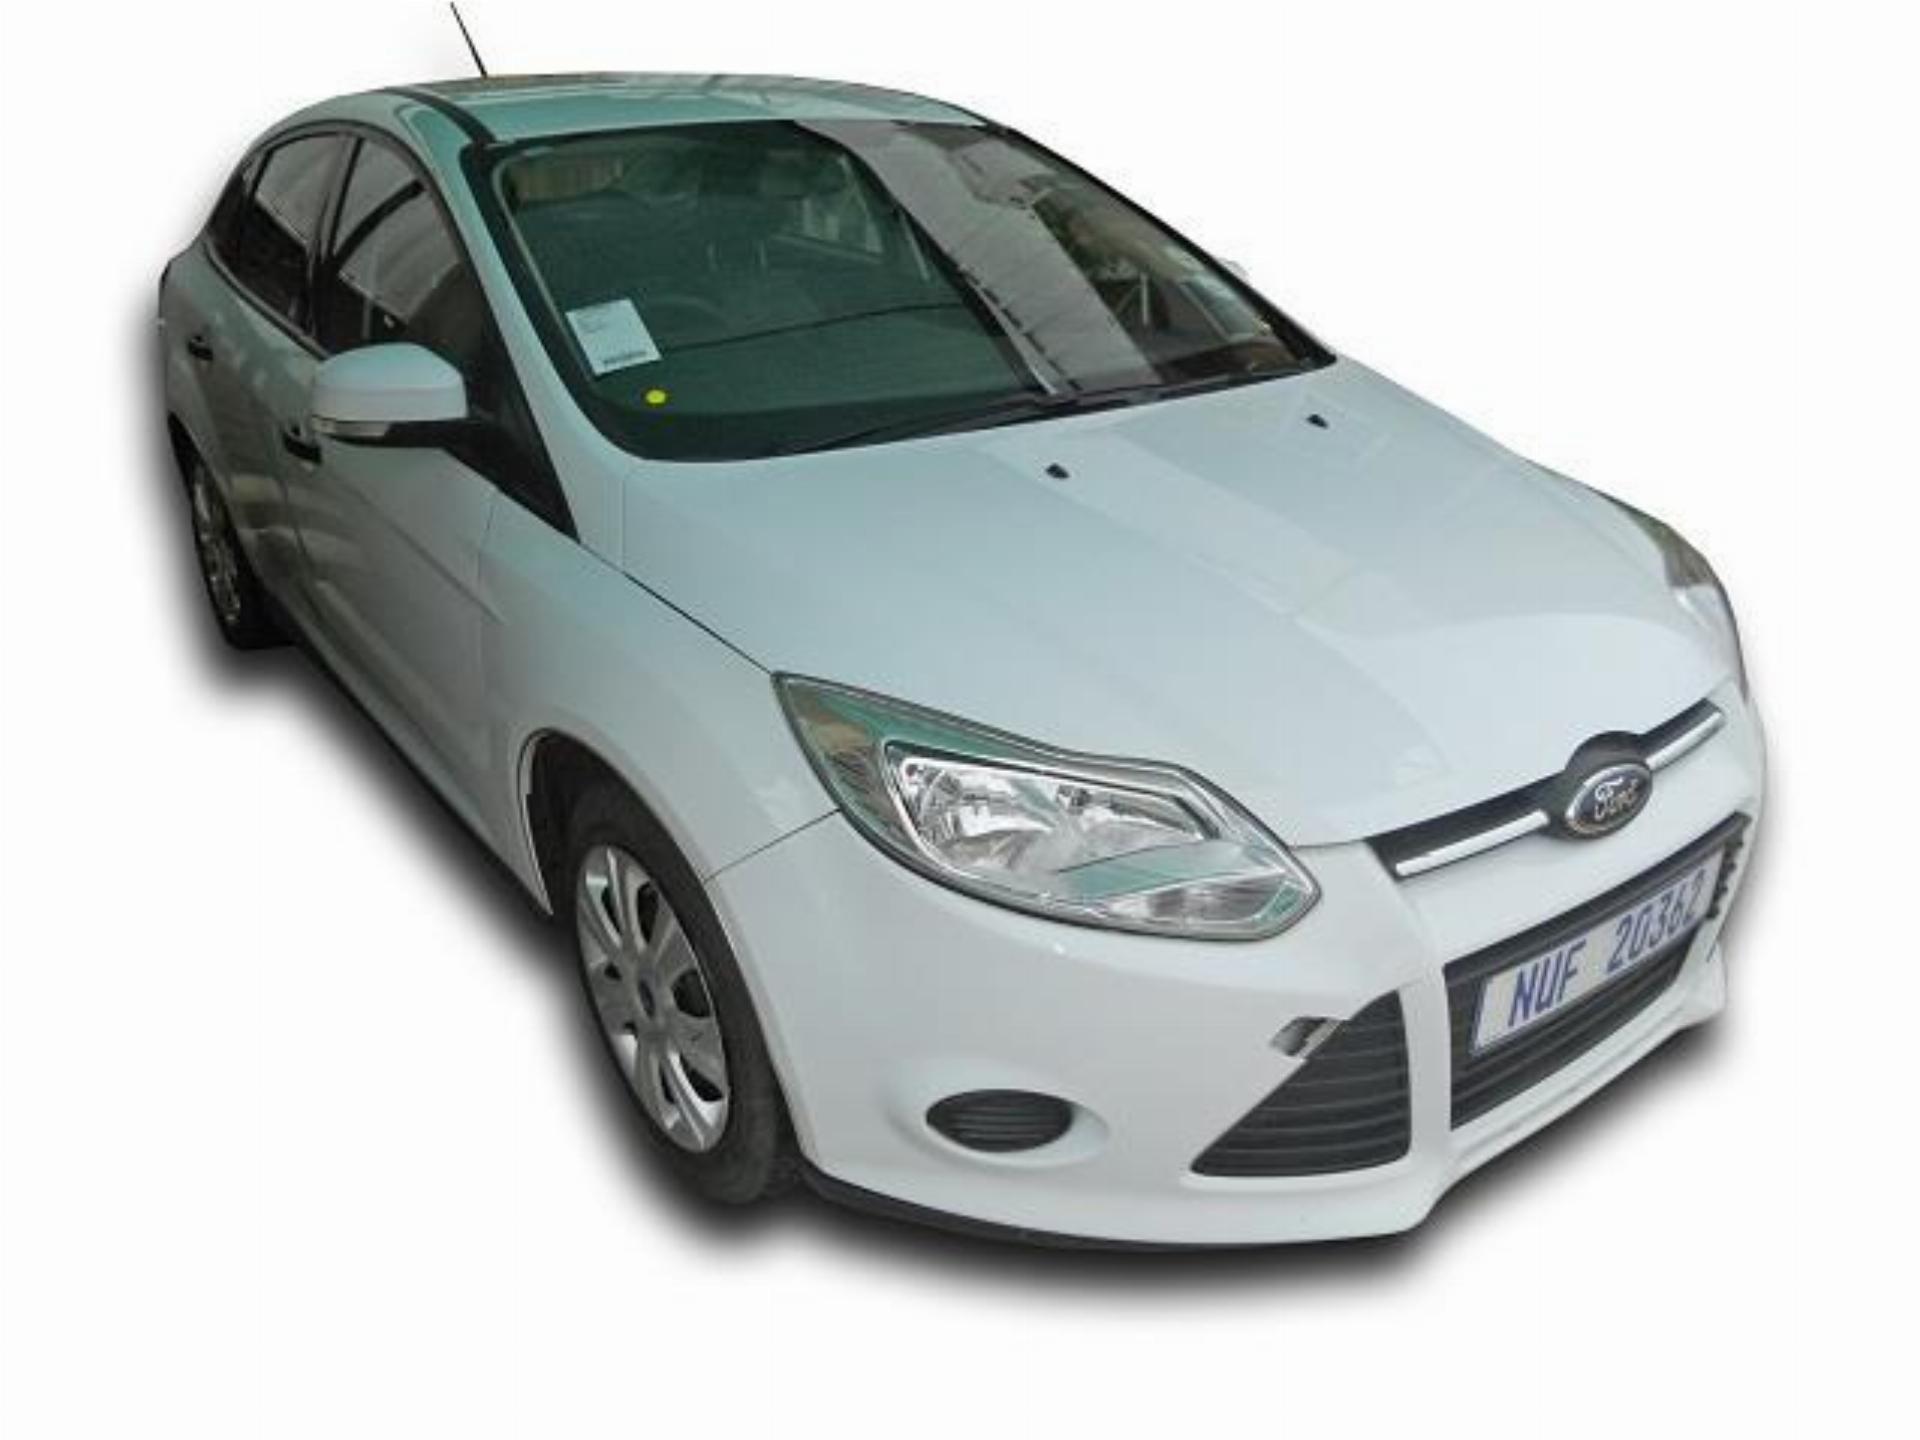 Ford Focus 1.6 TI VCT Ambiente